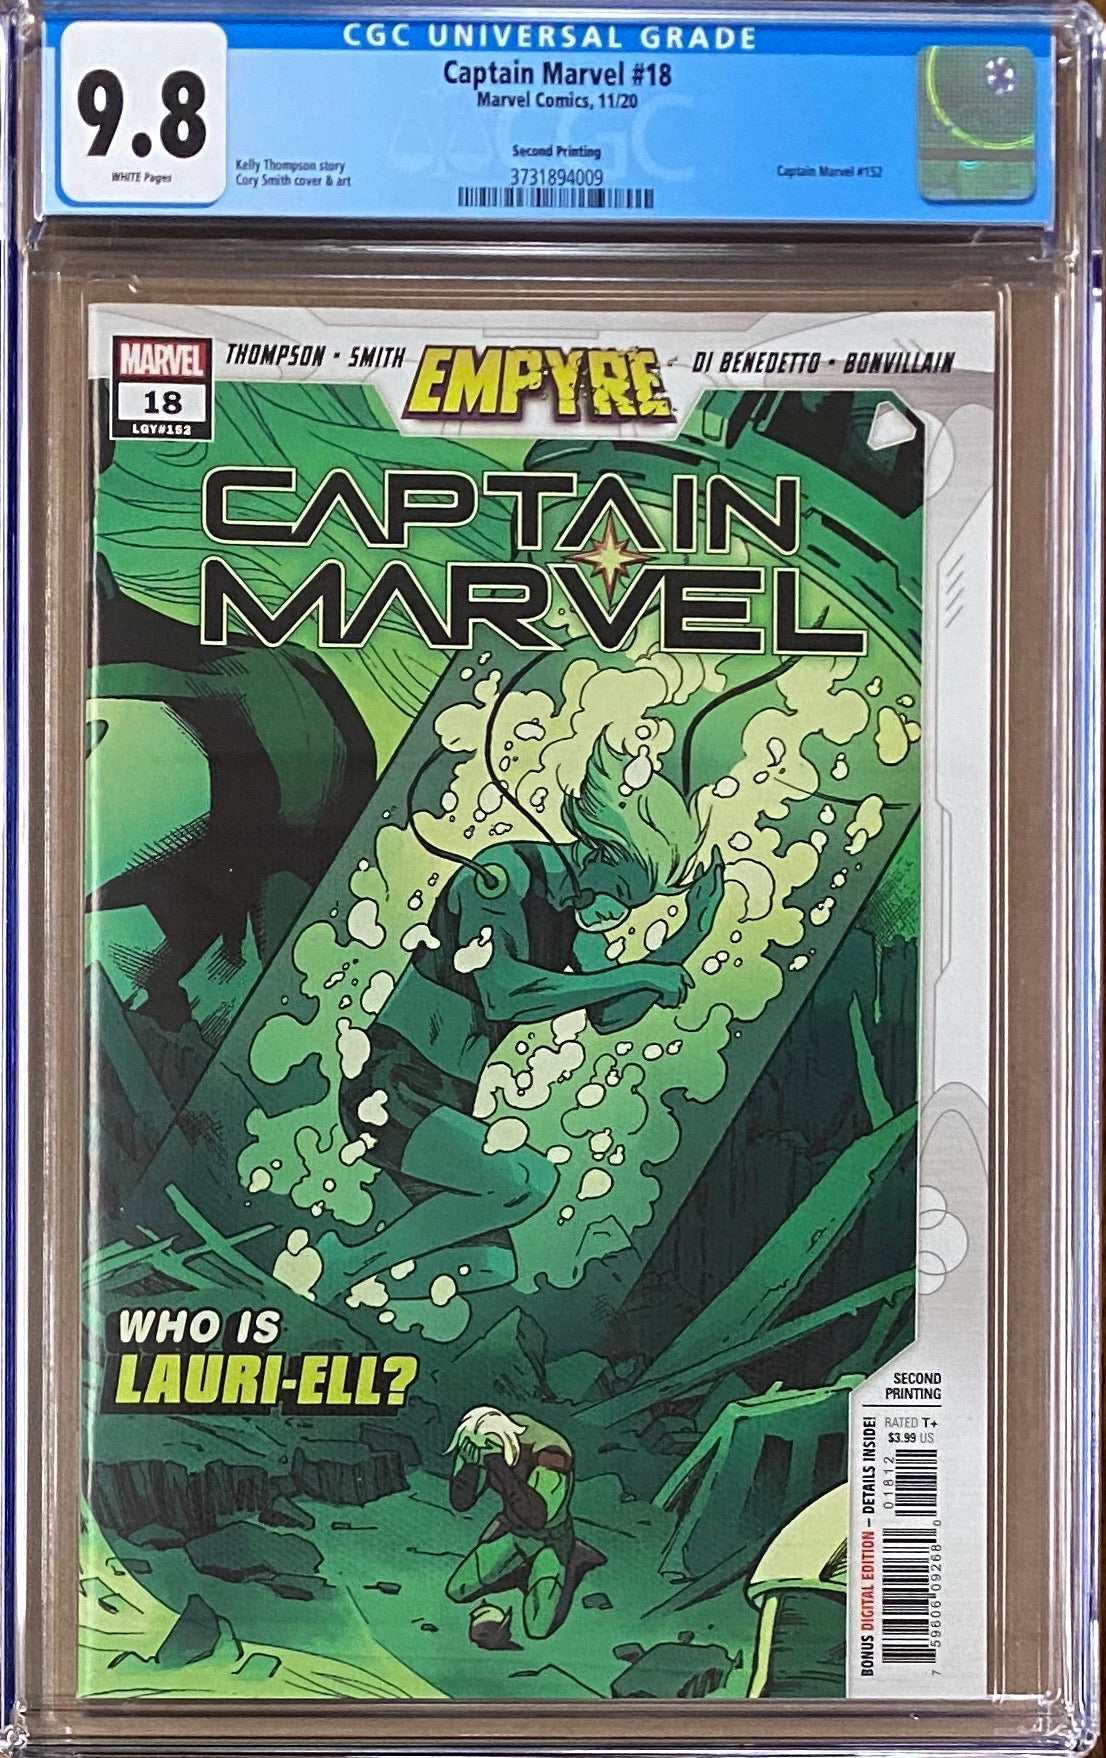 Captain Marvel #18 Second Printing CGC 9.8 - First Lauri-Ell